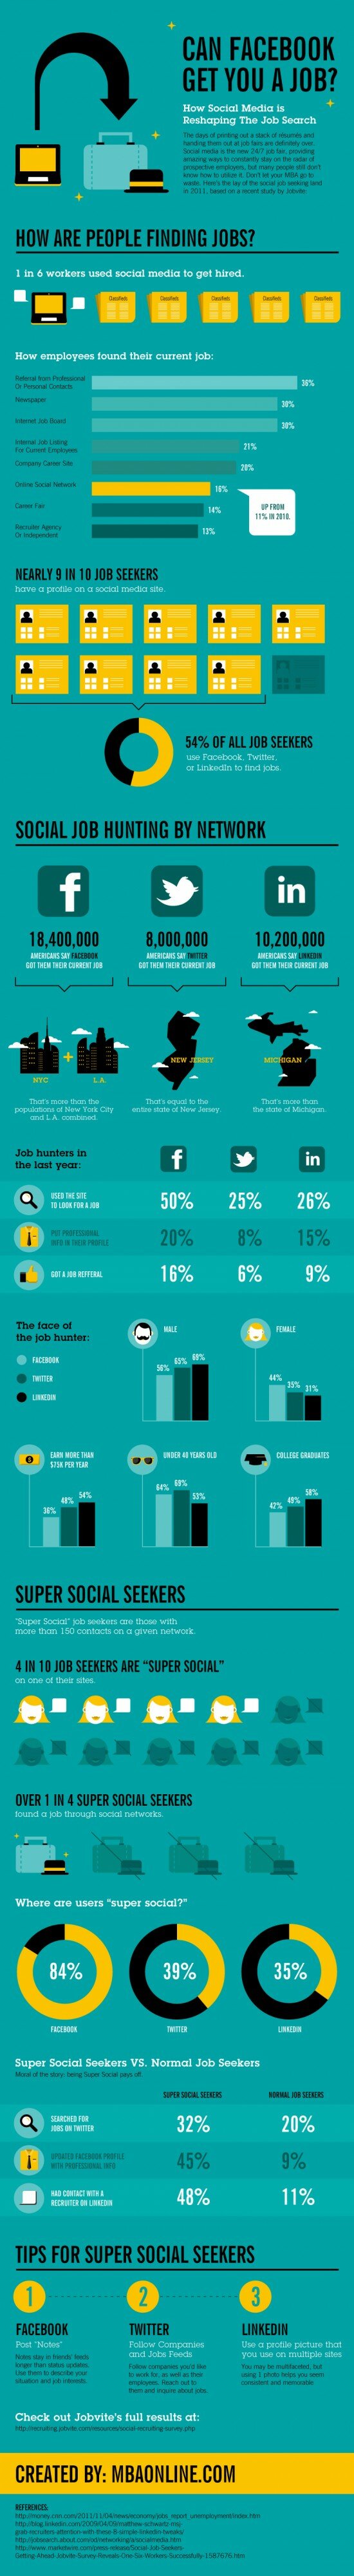 How to find a job thanks to Facebook infographic